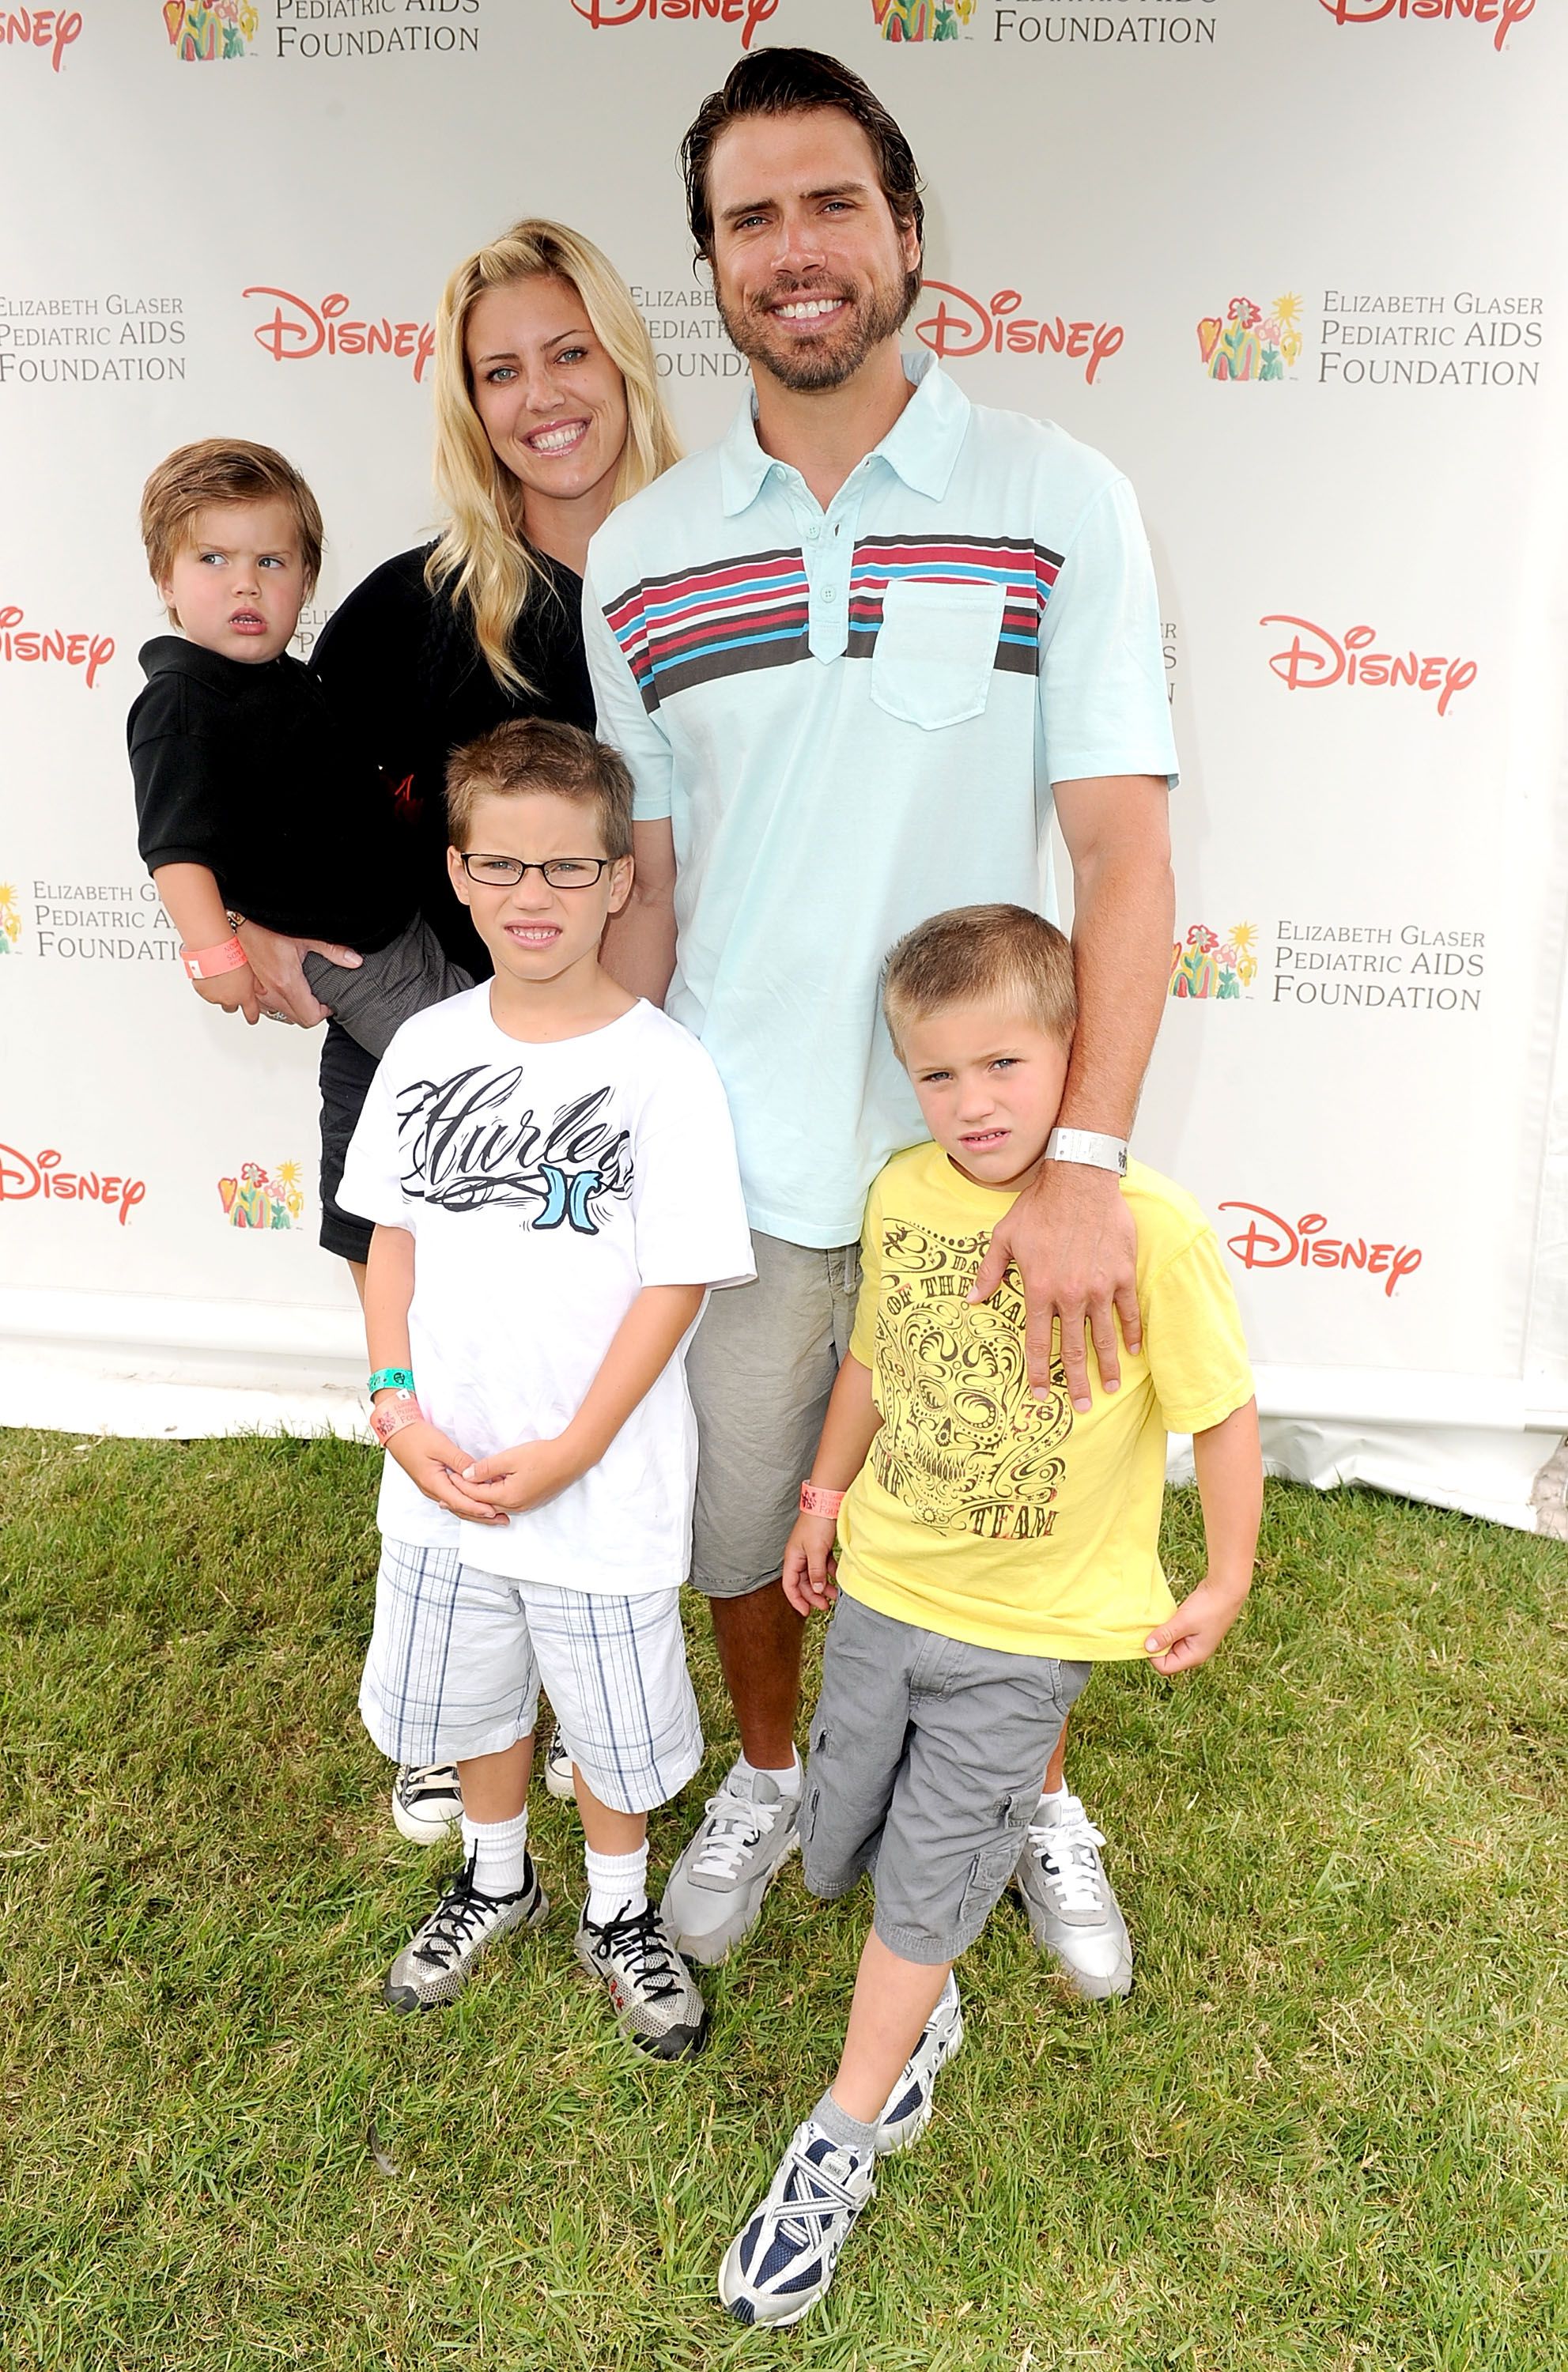 Joshua Morrow, Tobe Keeney and their kids during the 21st A Time For Heroes Celebrity Picnic sponsored by Disney to benefit the Elizabeth Glaser Pediatric Aids Foundation held at Wadsworth Great Lawn on June 13, 2010, in Los Angeles, California. | Source: Getty Images